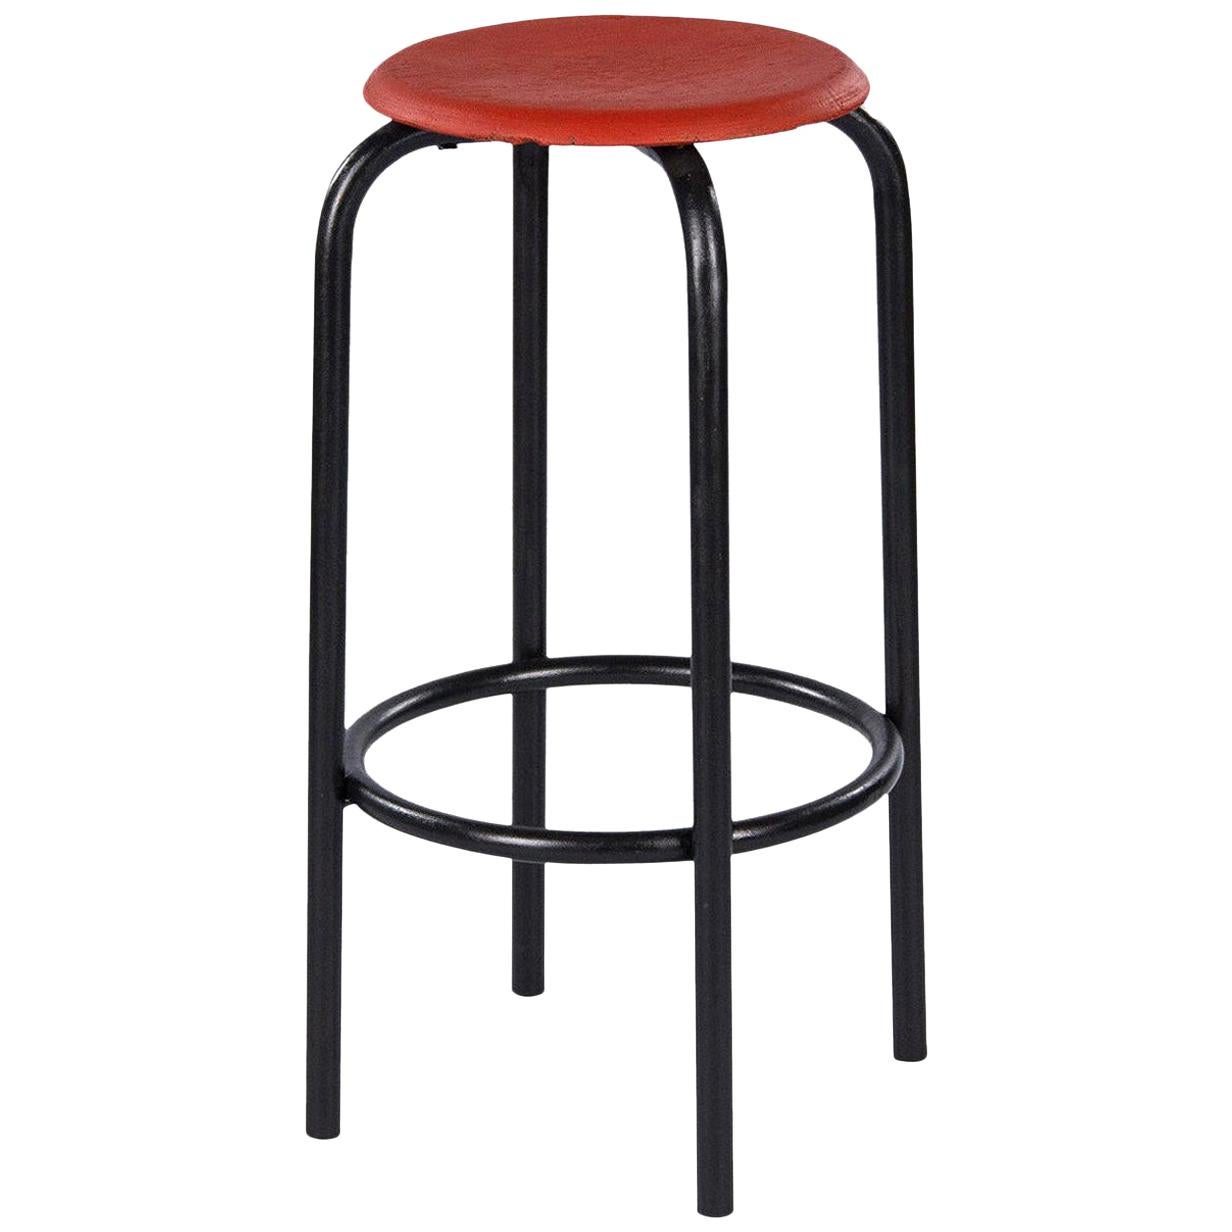 French Vintage Industrial Red and Black Stool, 1950s